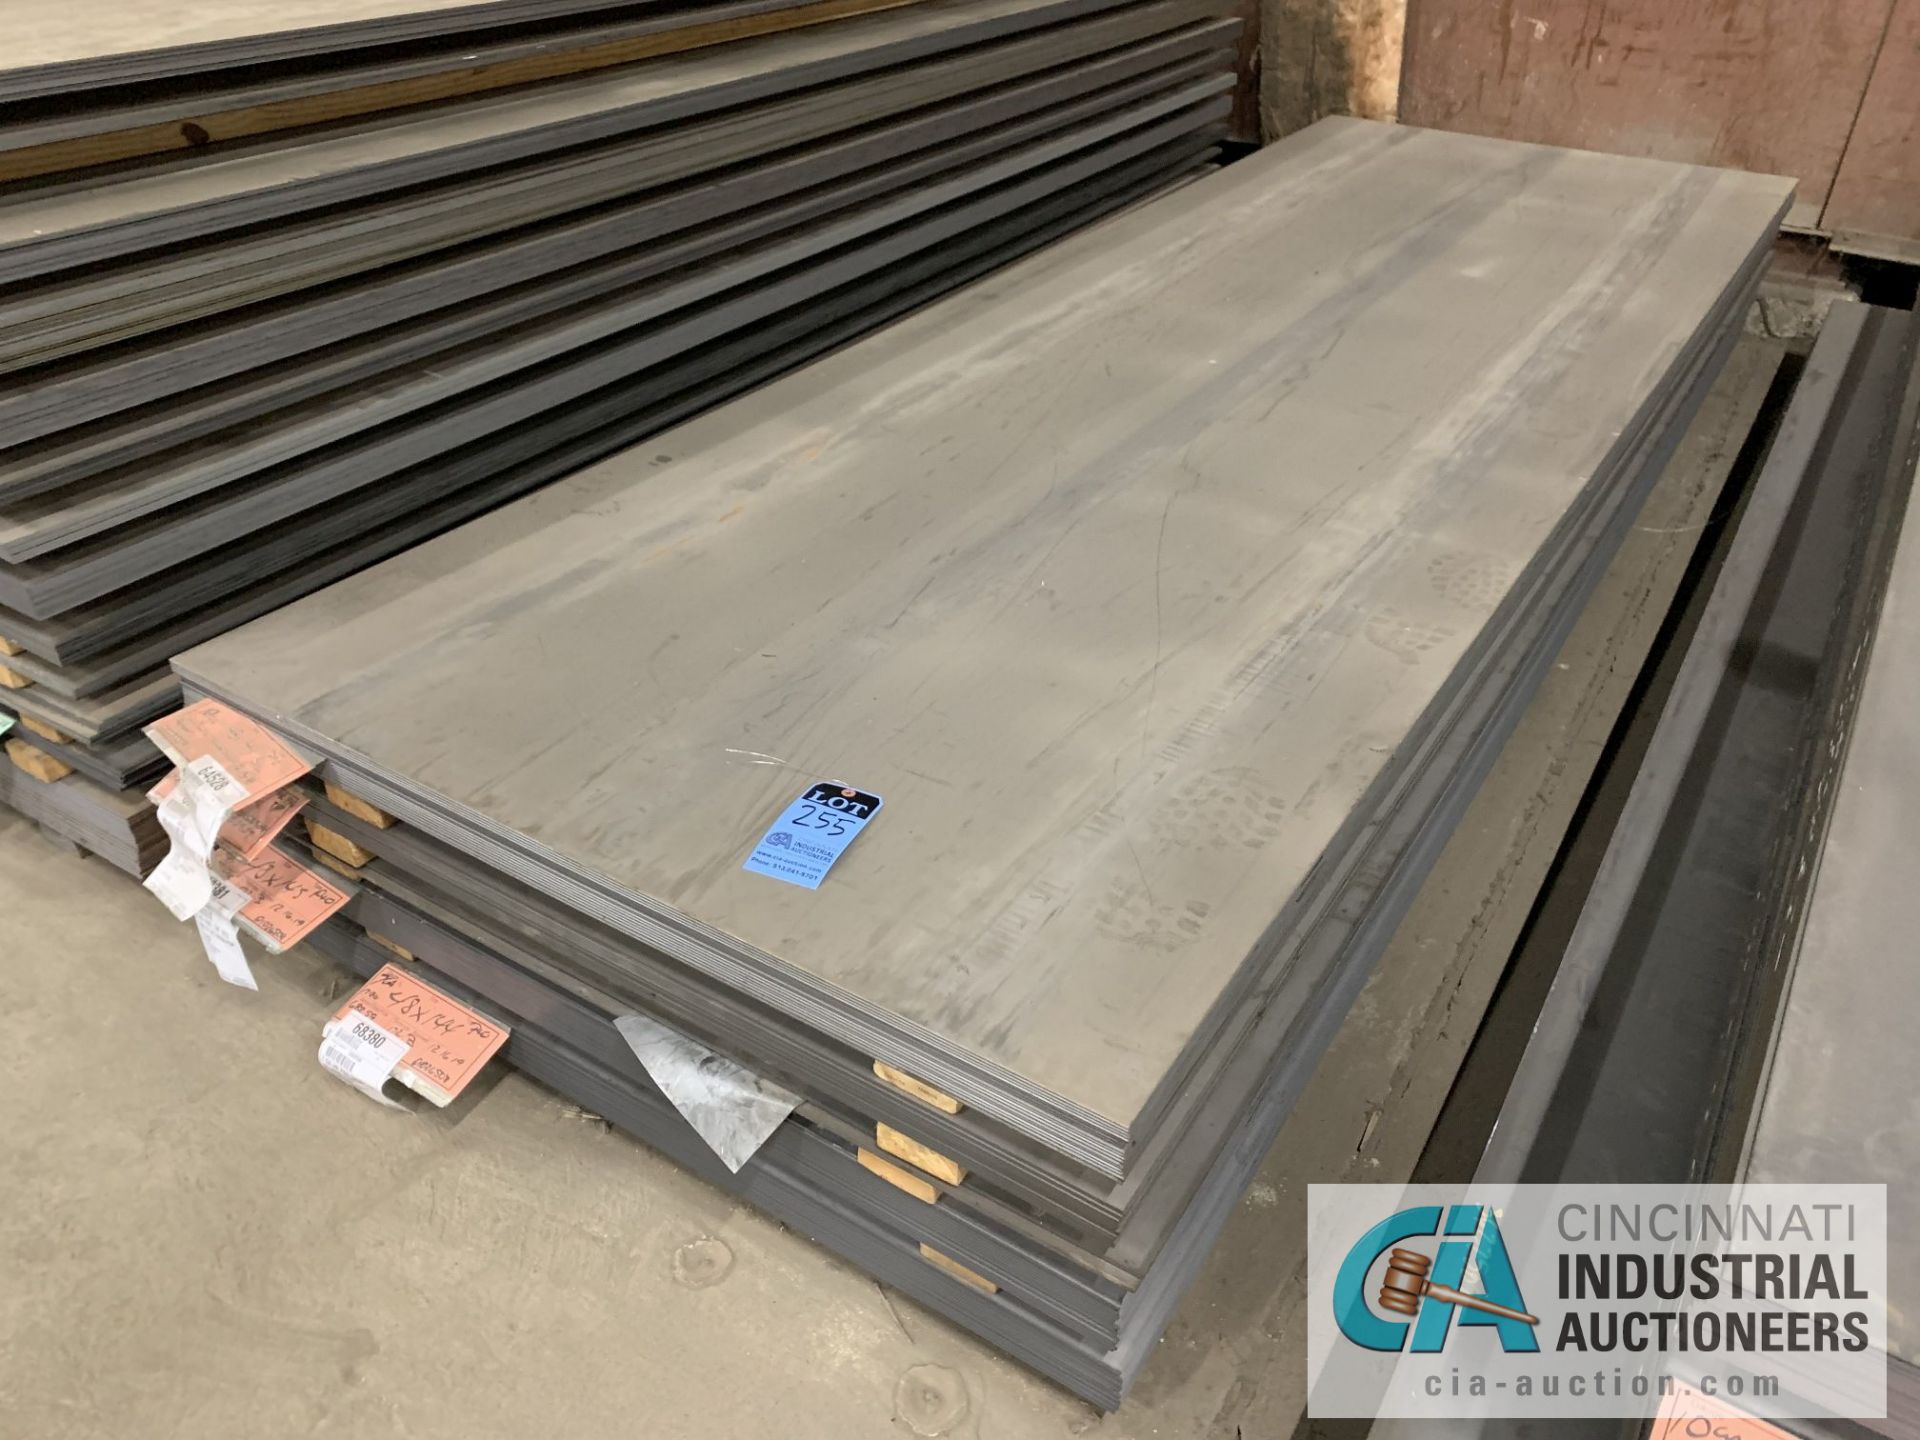 (LOT) APPROX. 21,481 LBS. UNCOATED SHEET STEEL, 1-STACK, 4-BUNDLES, SEE INVENTORY FOR LISTING.